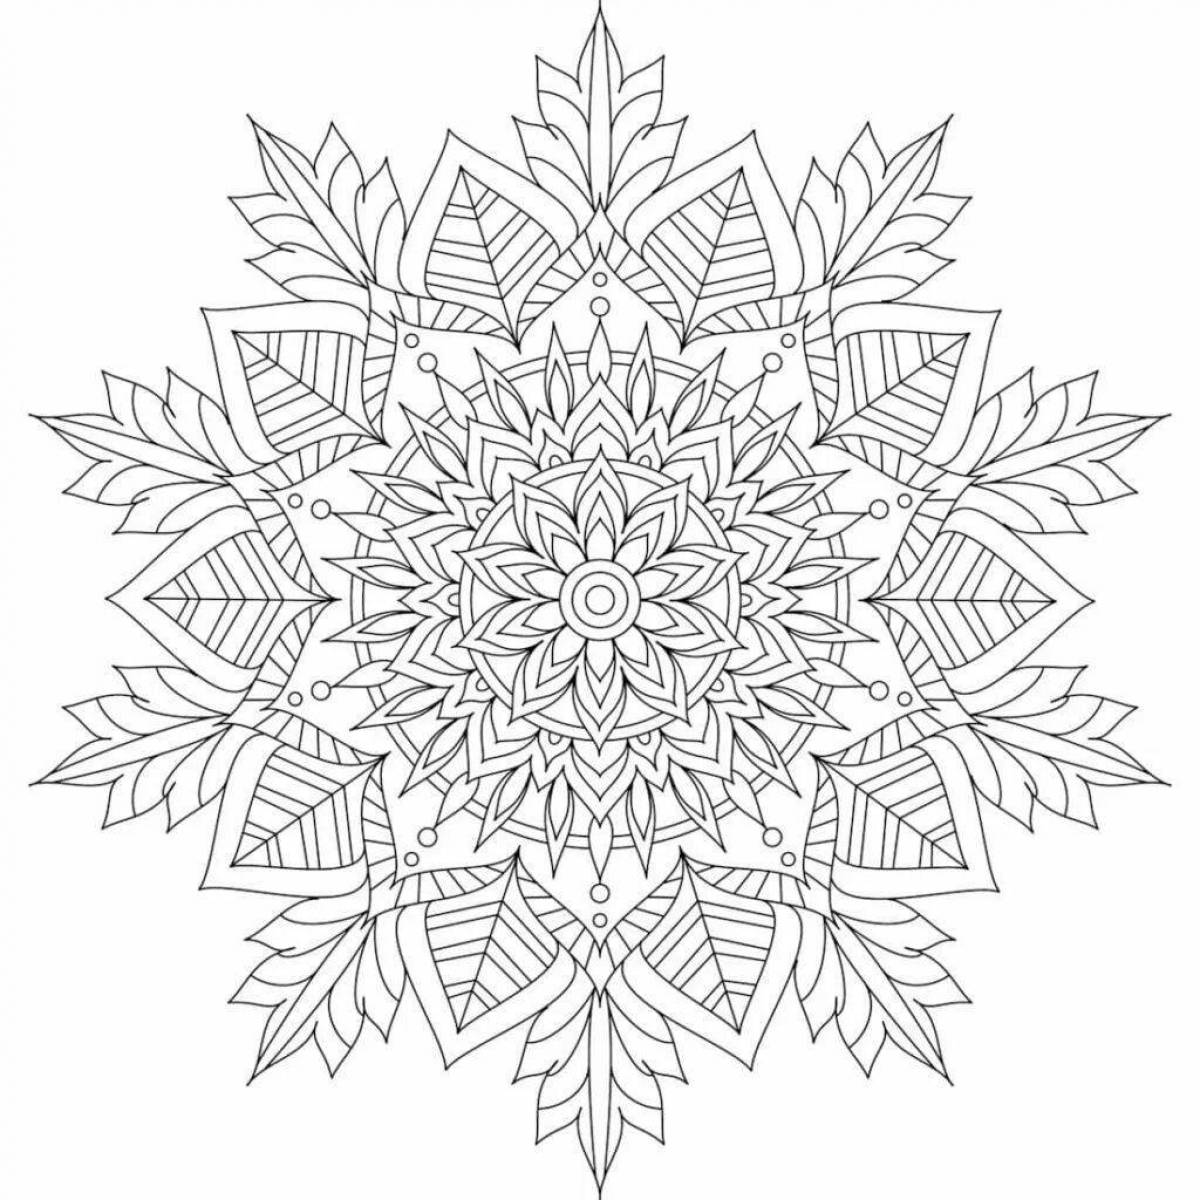 Relaxing coloring book antistress winter